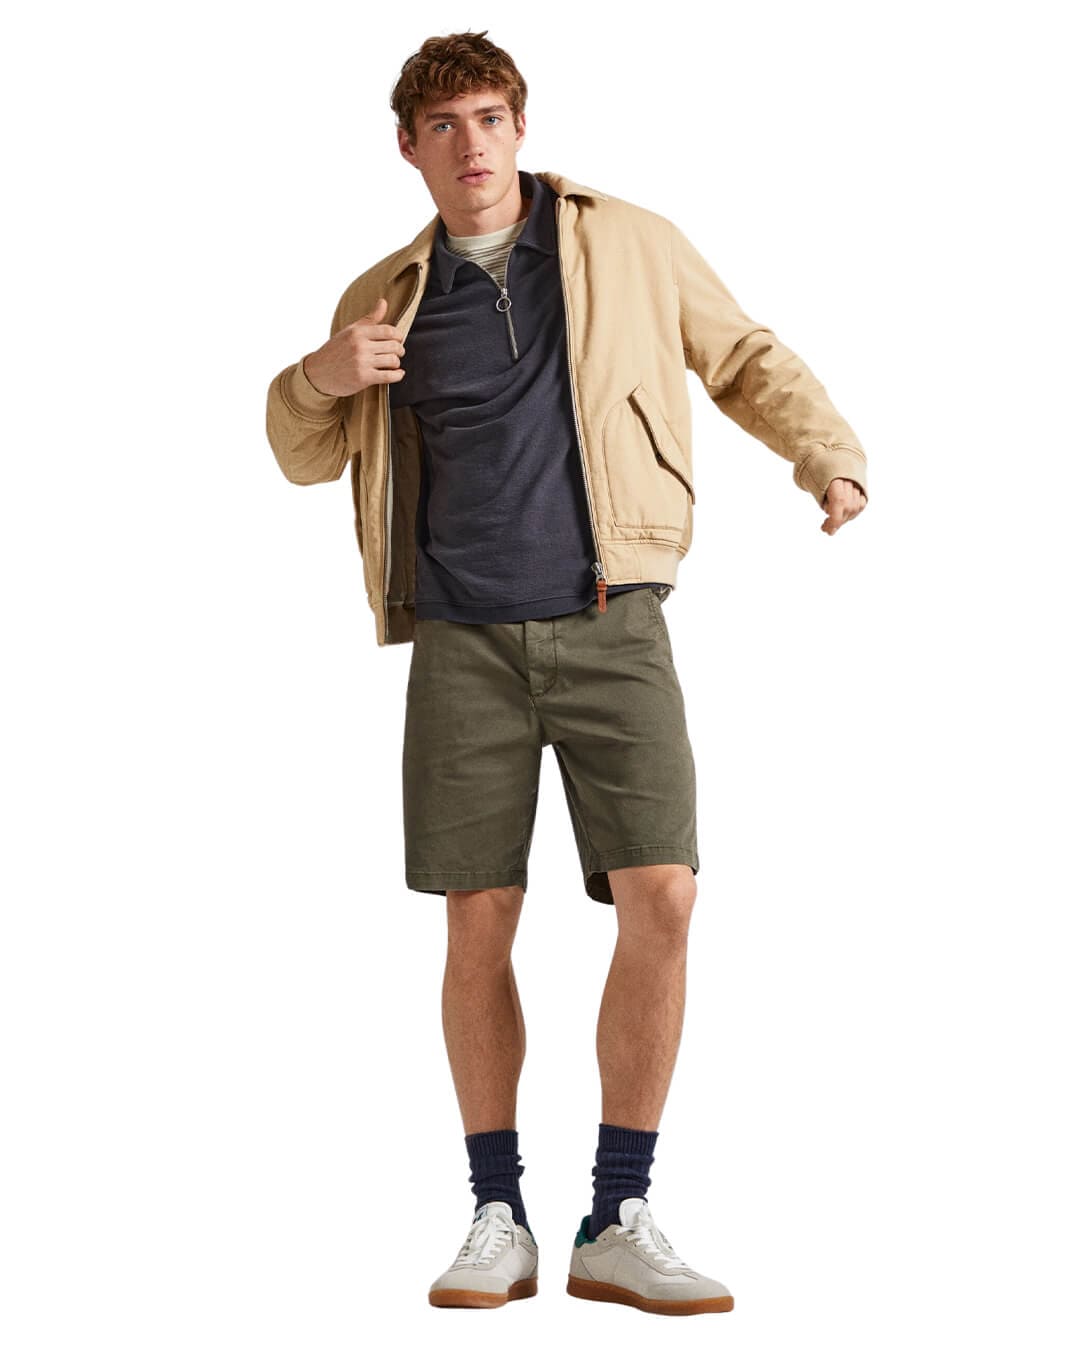 Pepe Jeans Shorts Pepe Jeans Military Green Regular Fit Chino Shorts